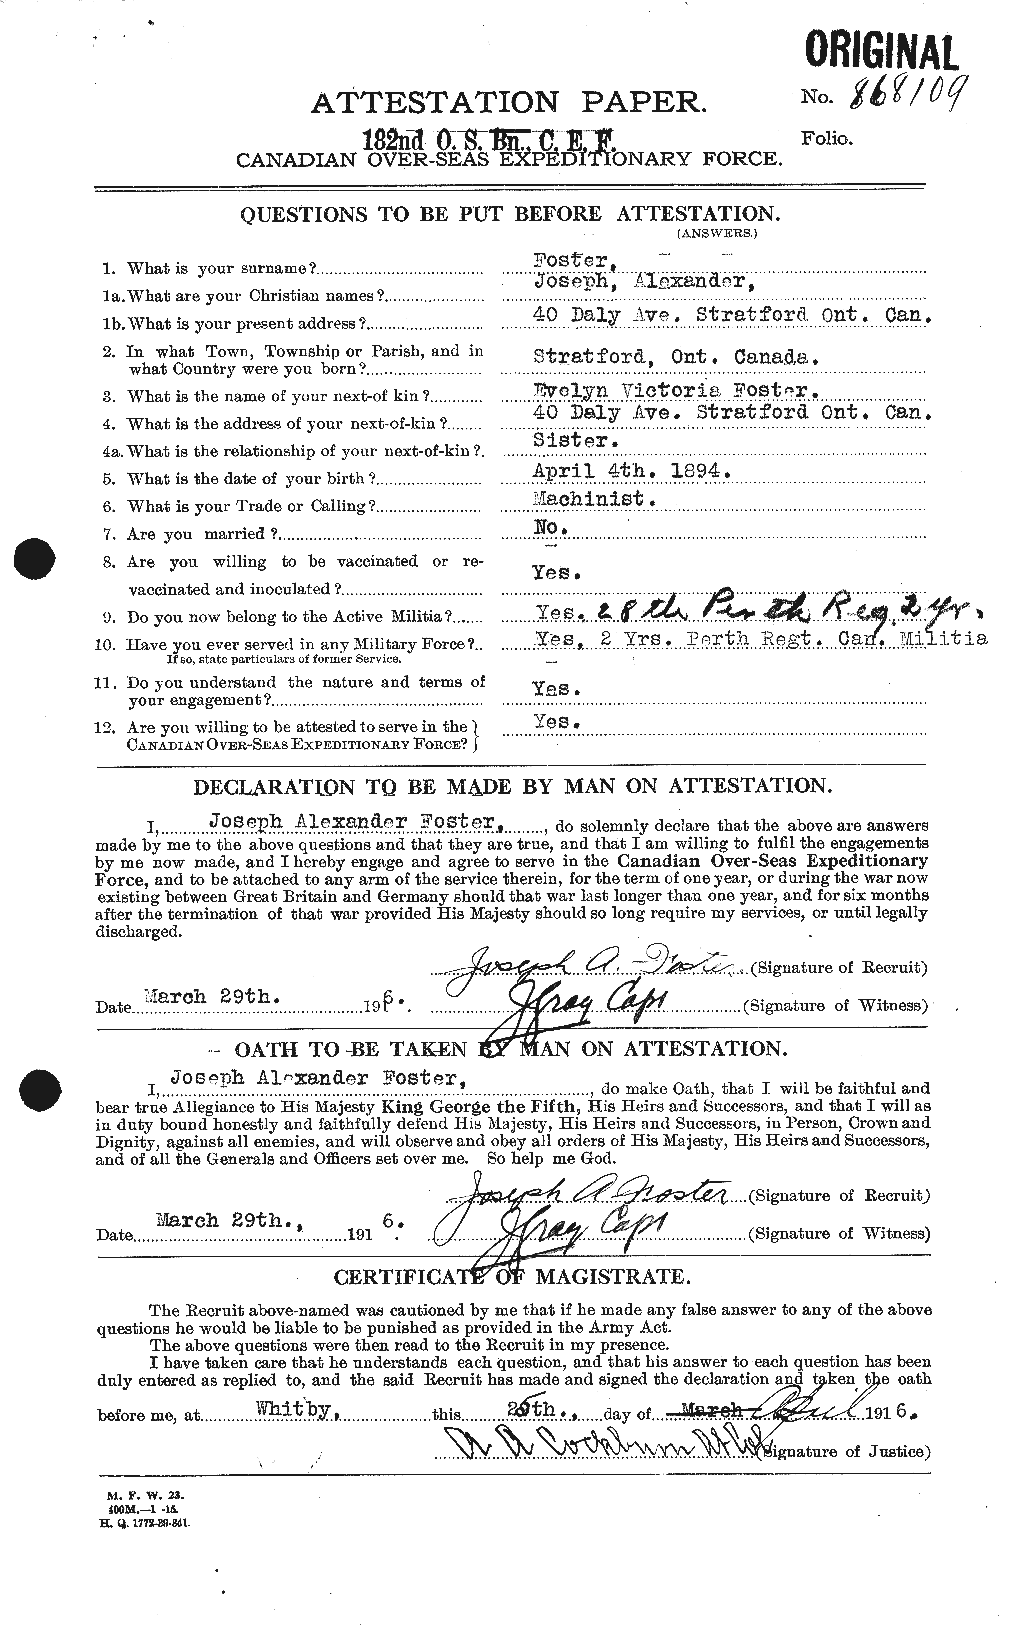 Personnel Records of the First World War - CEF 333384a